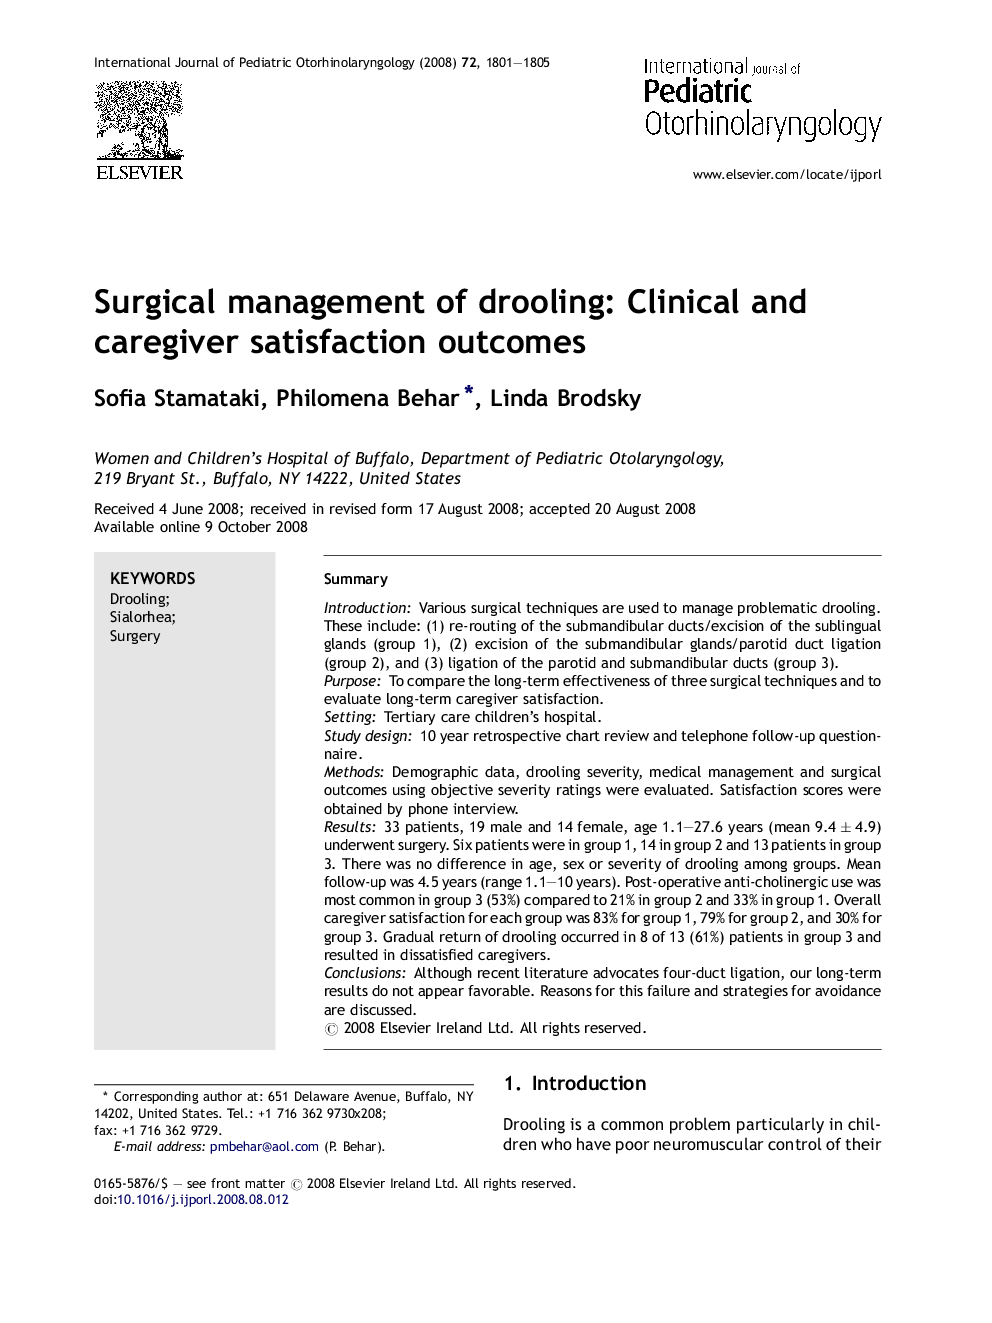 Surgical management of drooling: Clinical and caregiver satisfaction outcomes